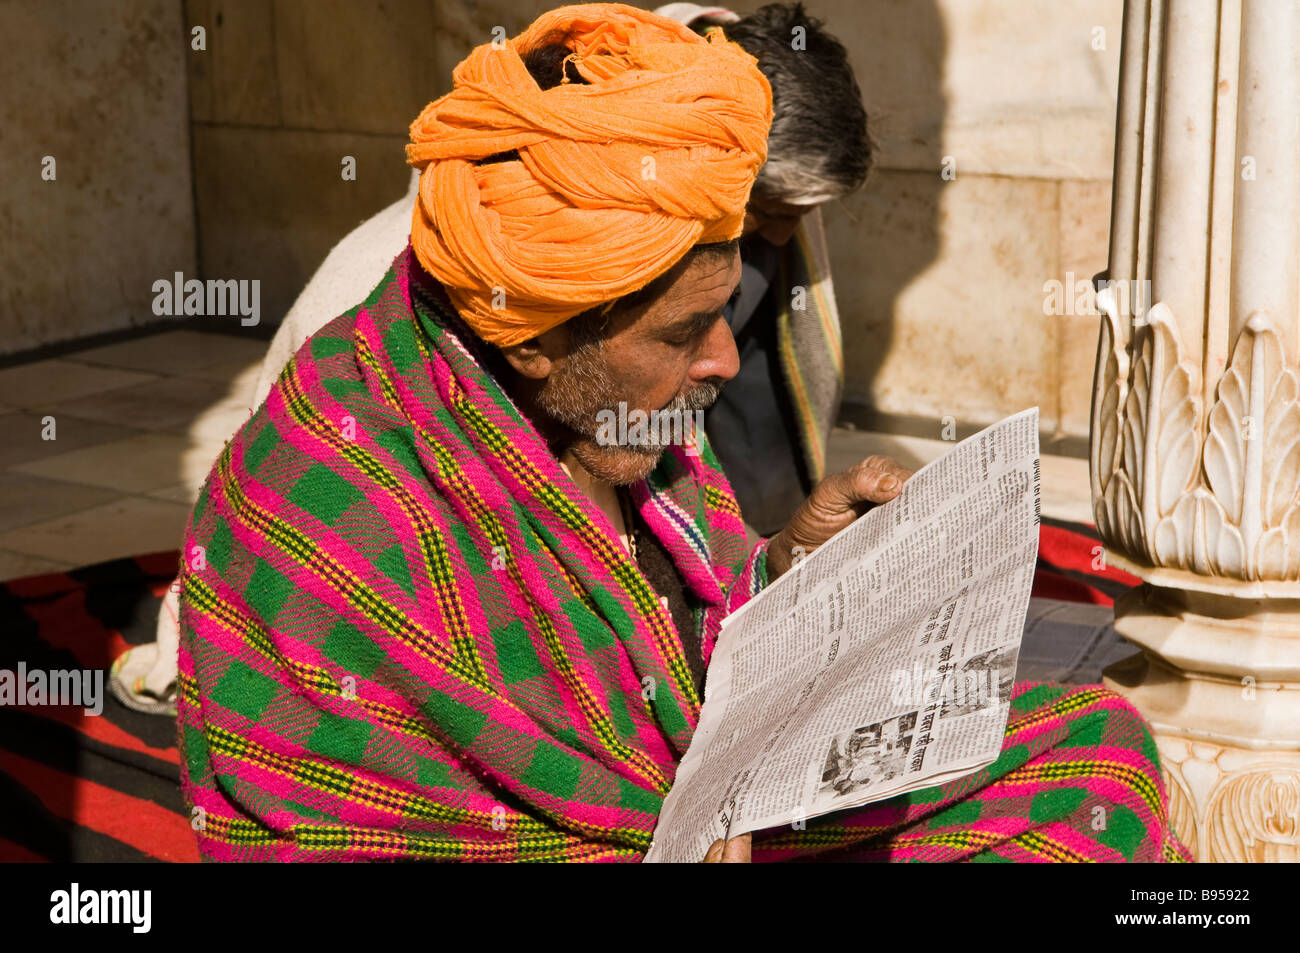 A man reads his newspaper inside the famous Rat temple of Karnimata located in Dishnoke ,south of the city of Bikaner, Rajasthan Stock Photo